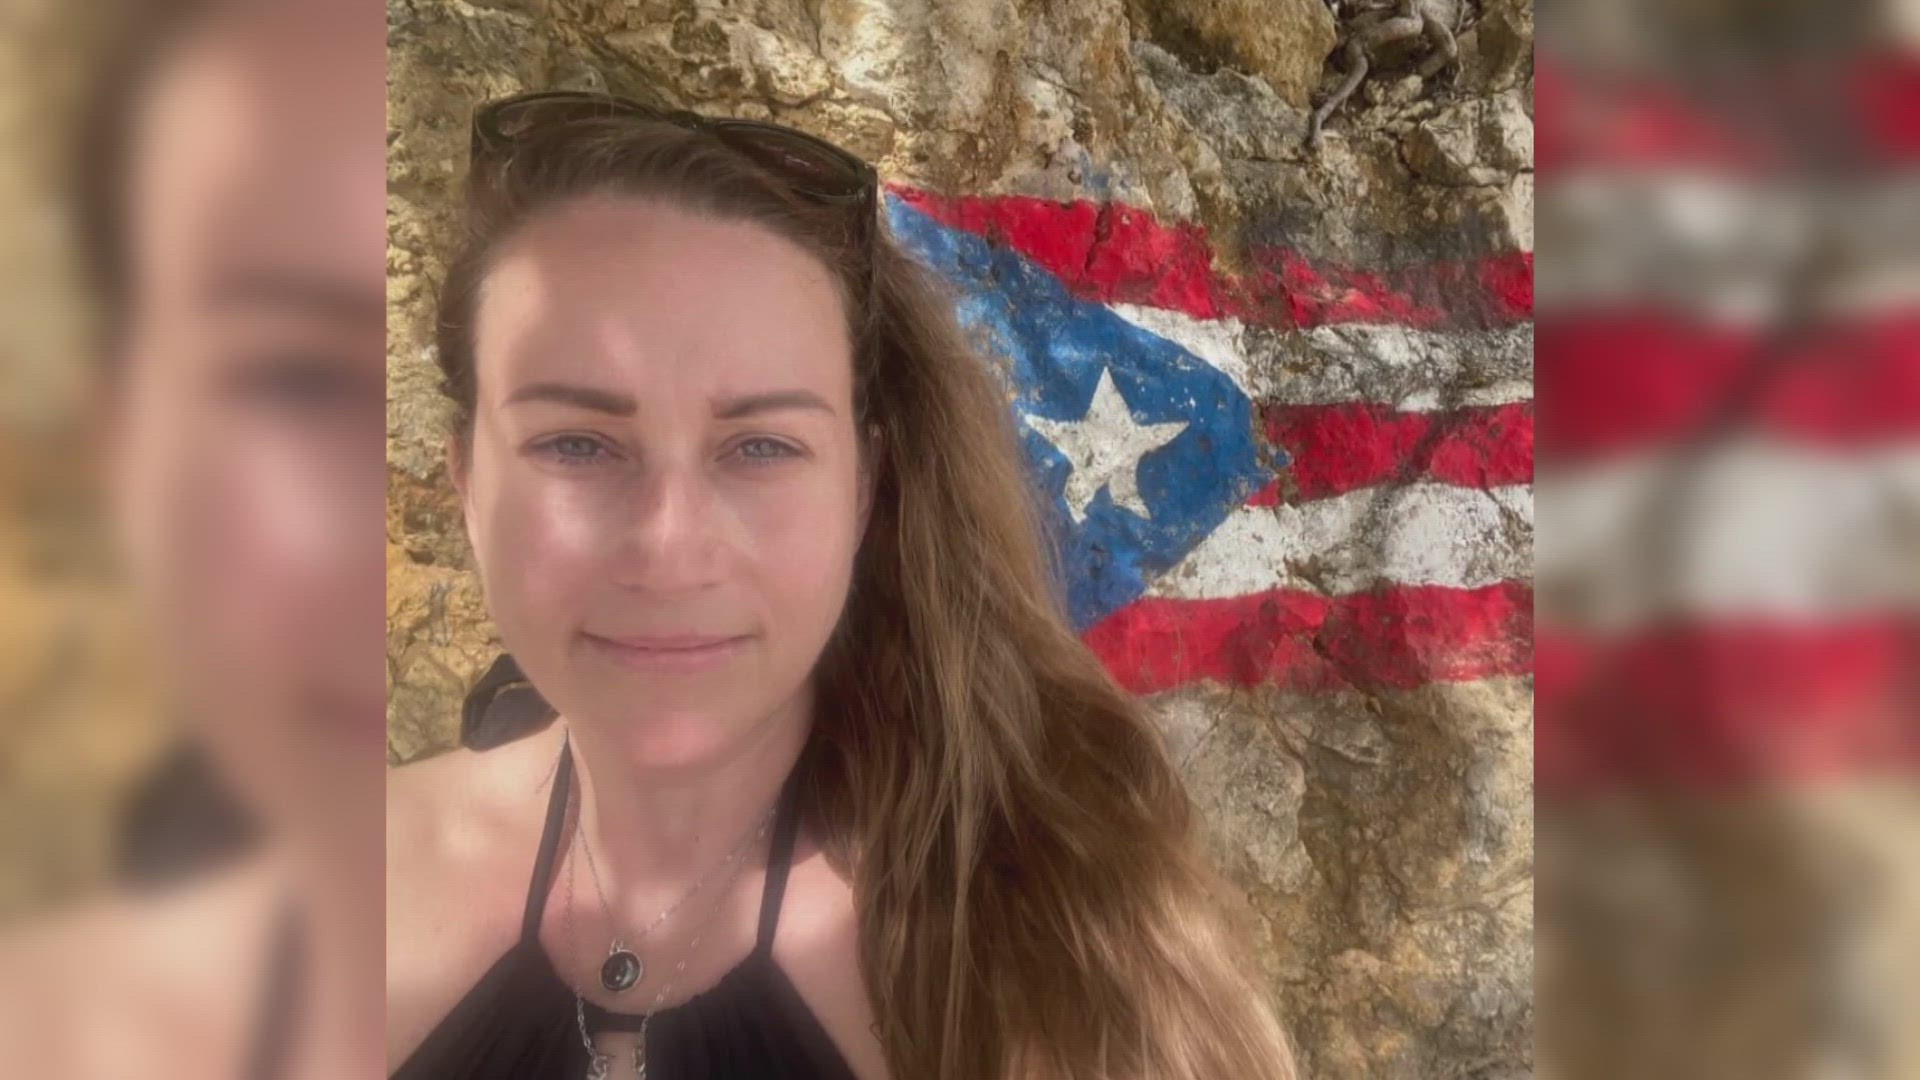 Amanda Webster went missing during a trip to Puerto Rico.